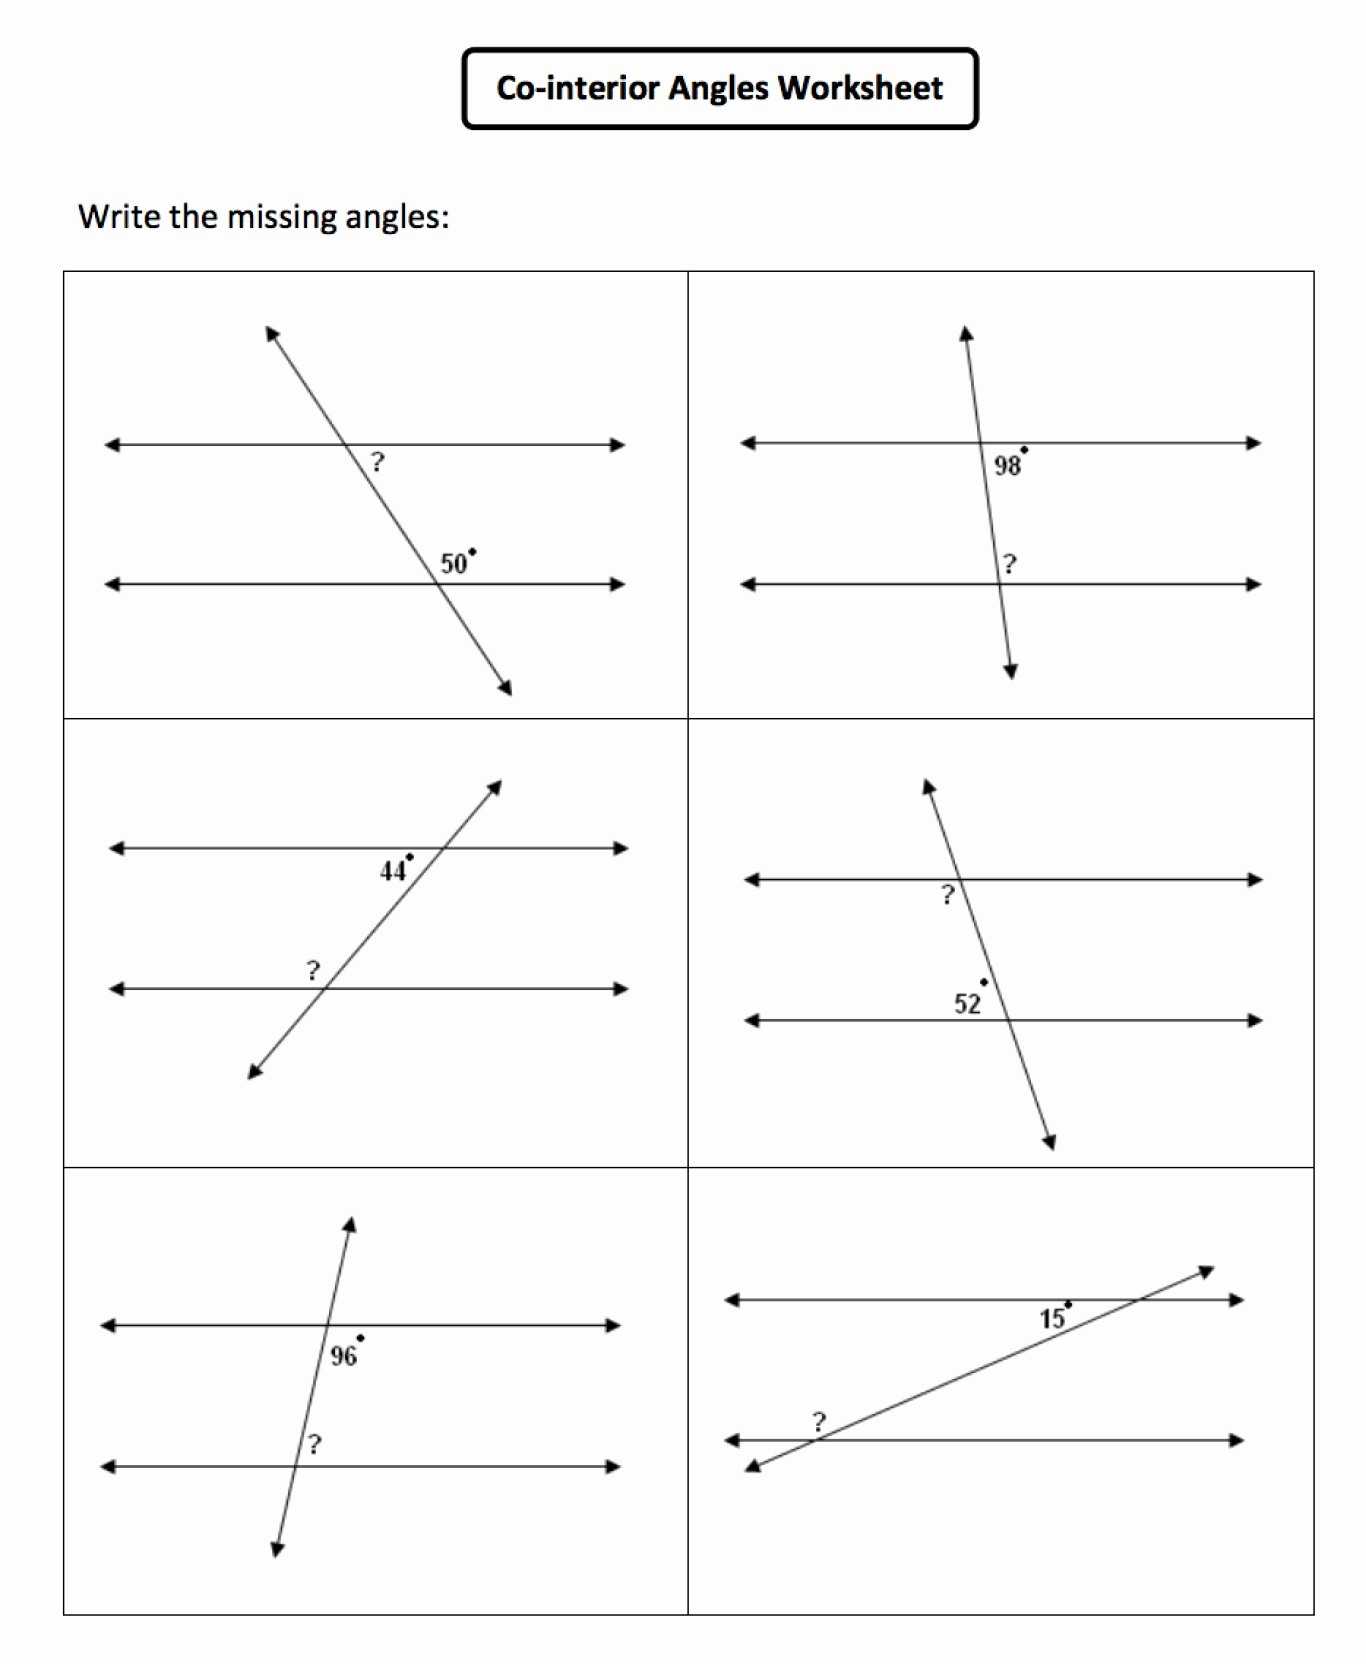 Missing Letters Worksheets as Well as Proofs Worksheet Inspirational Mathematical Diagram Best